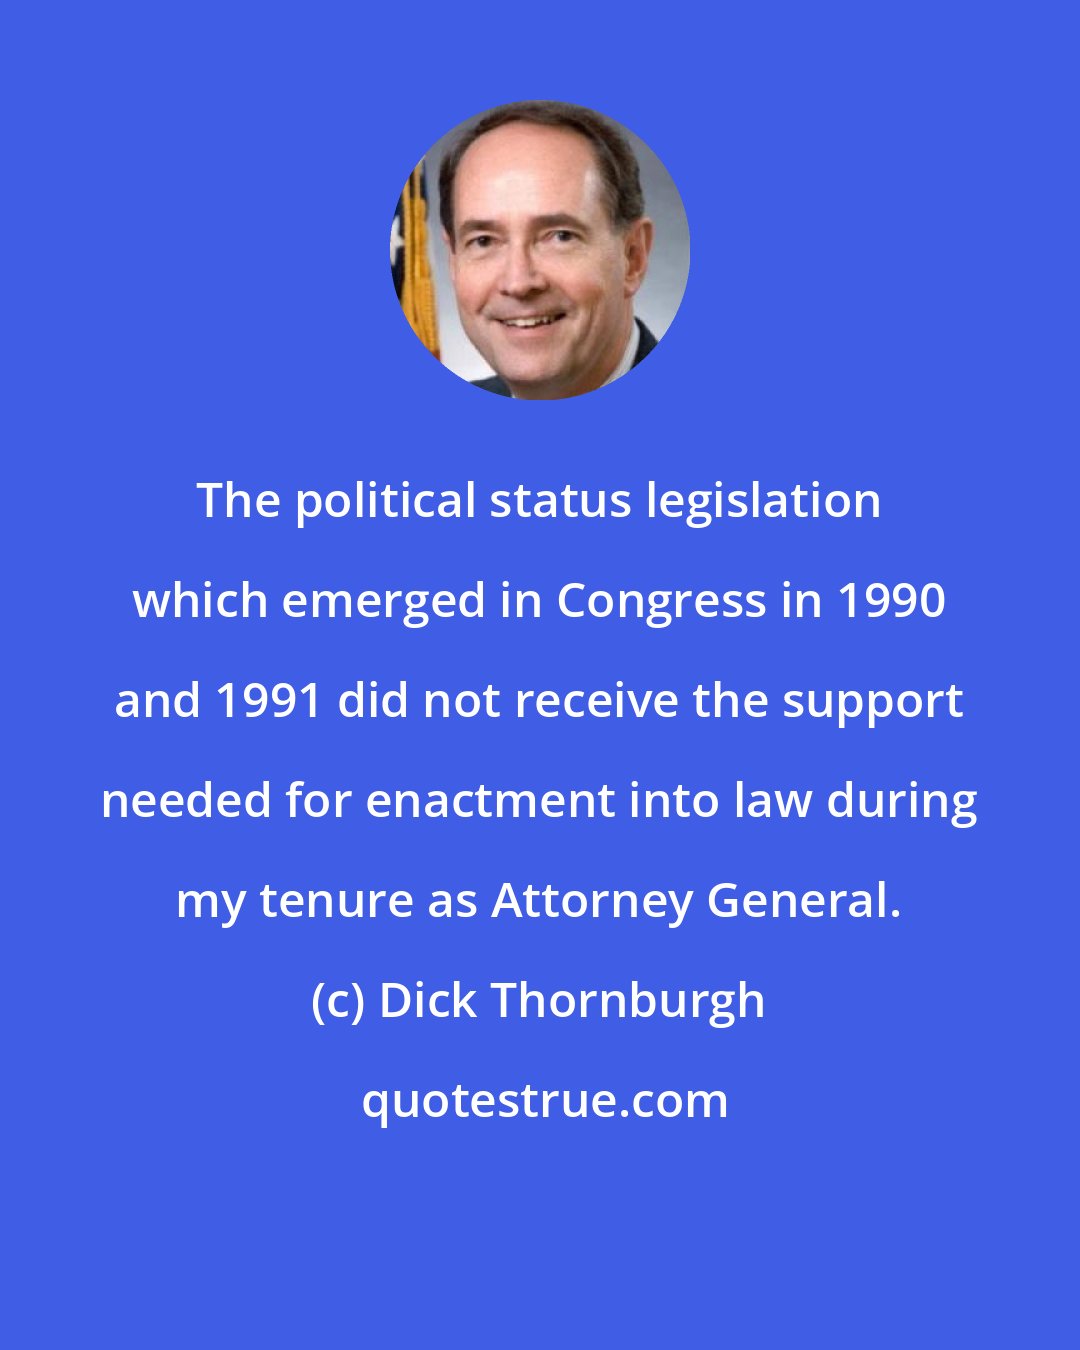 Dick Thornburgh: The political status legislation which emerged in Congress in 1990 and 1991 did not receive the support needed for enactment into law during my tenure as Attorney General.